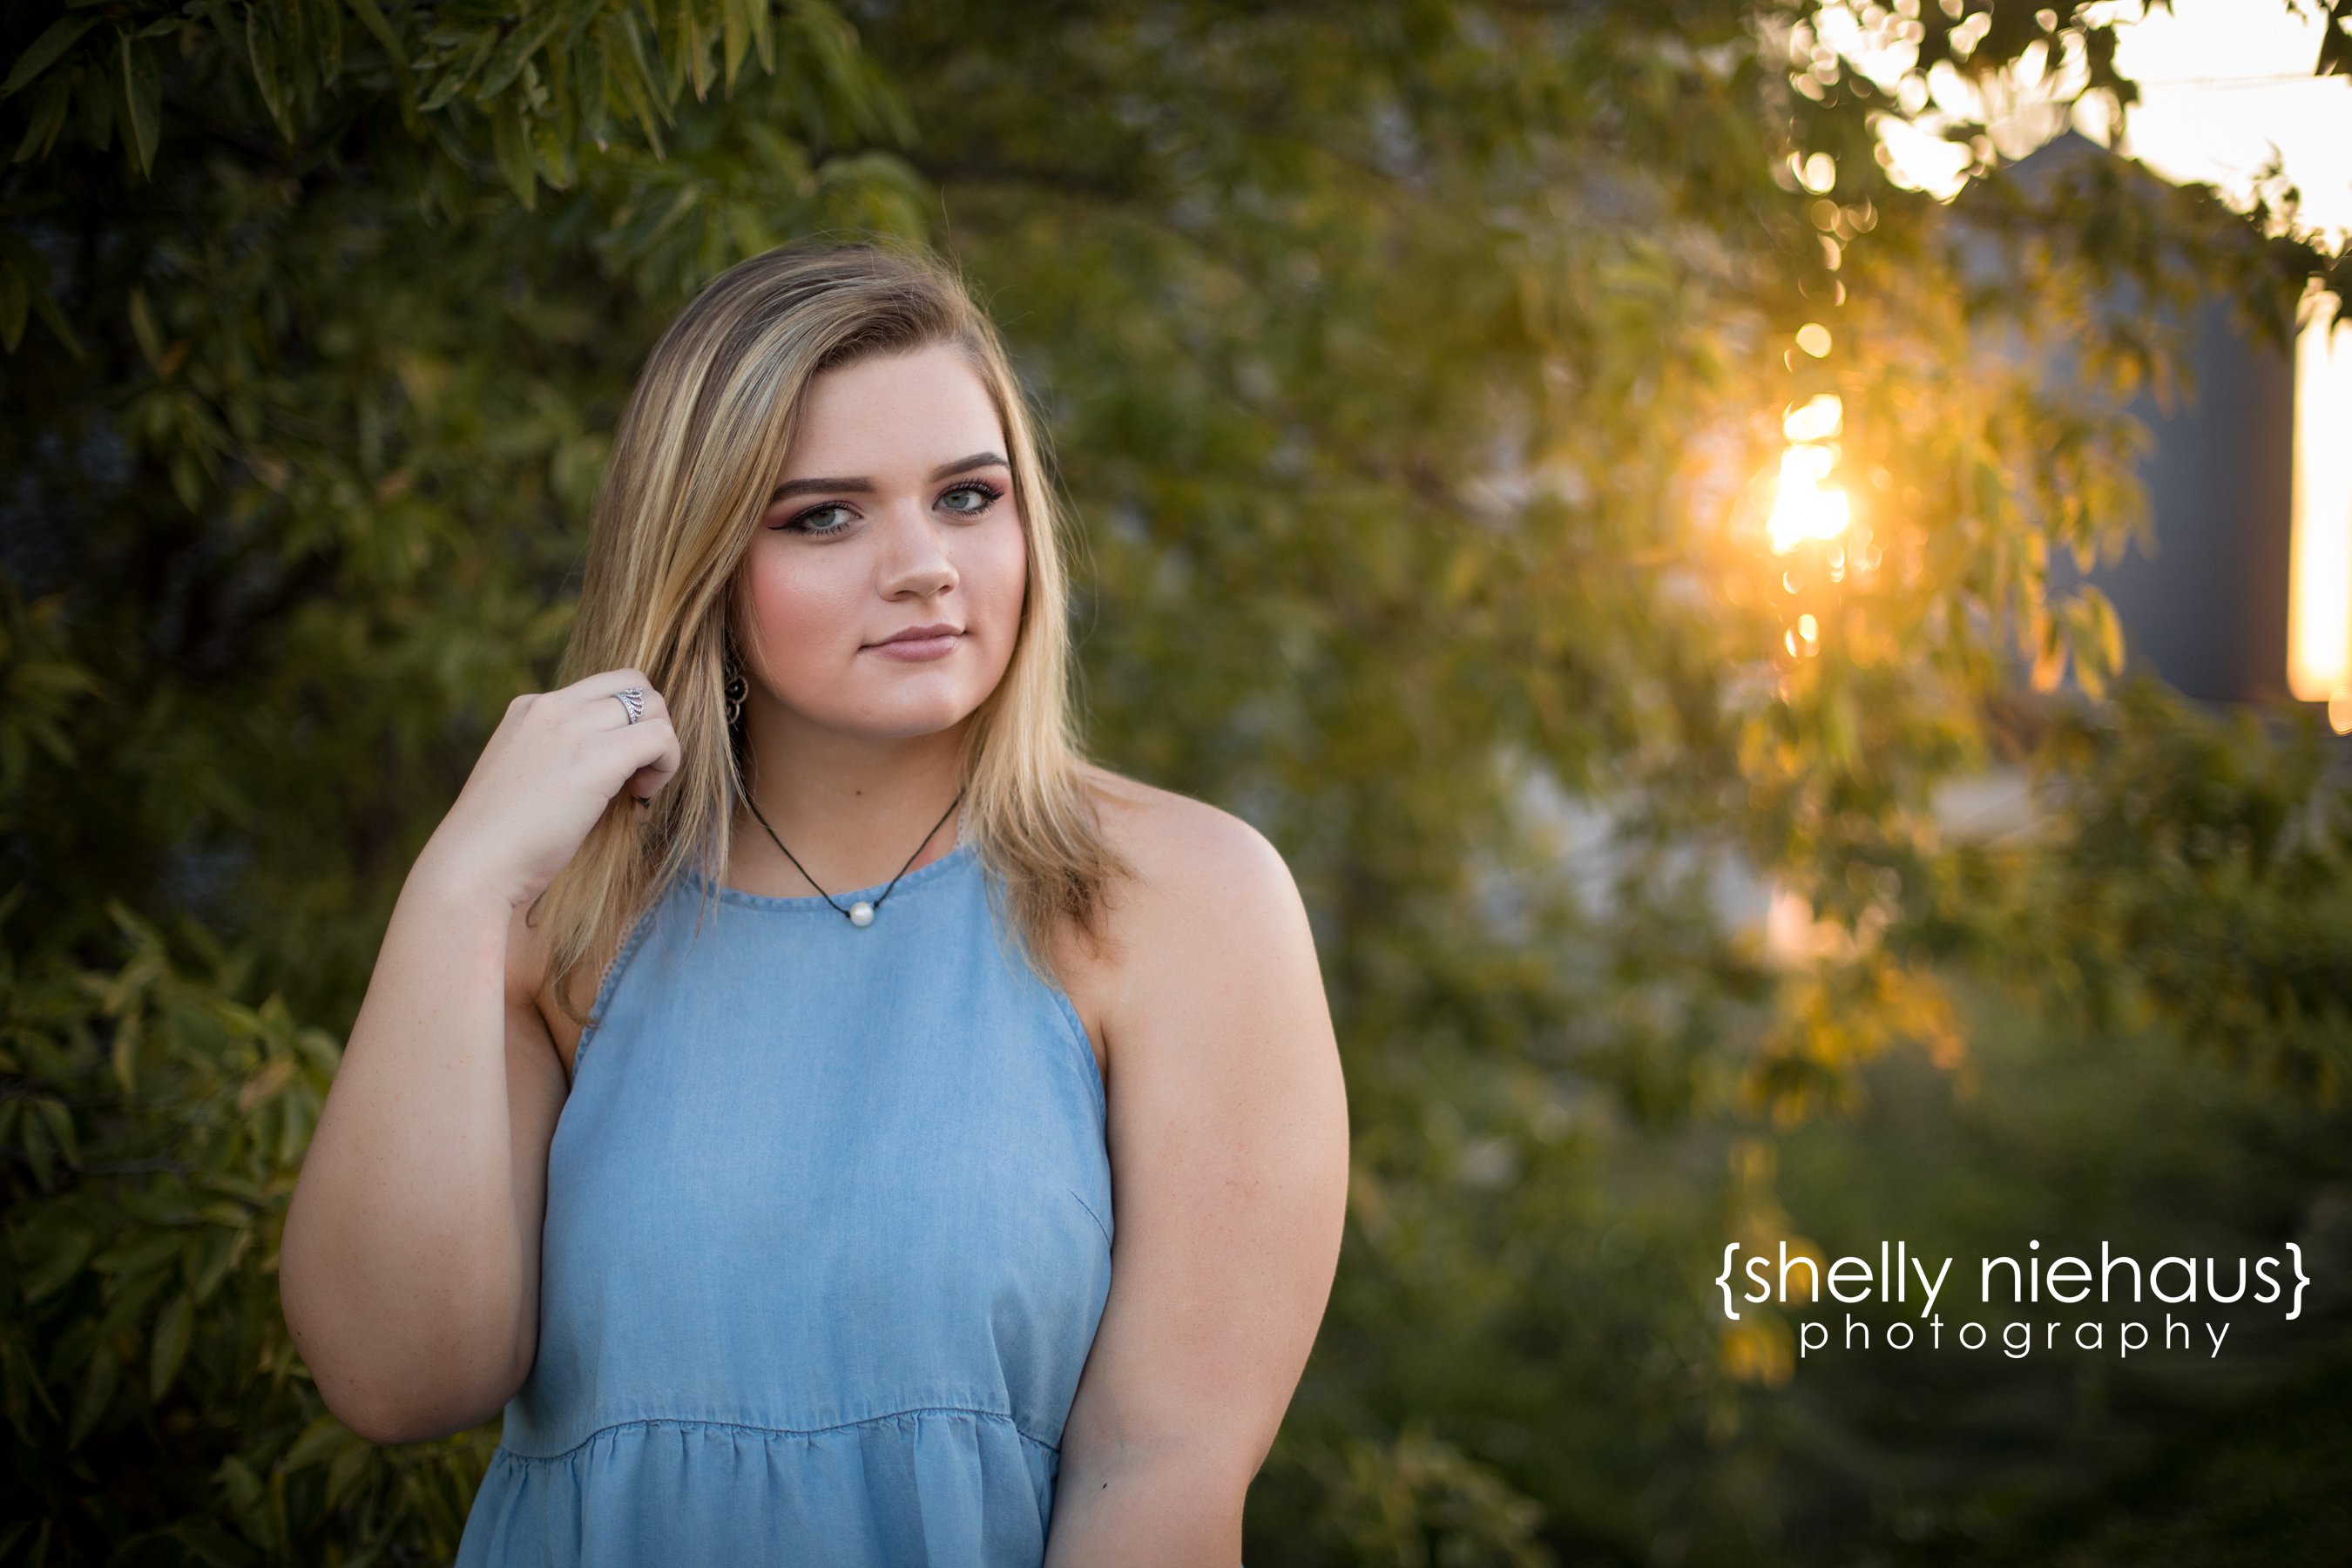 Shelly niehaus photography